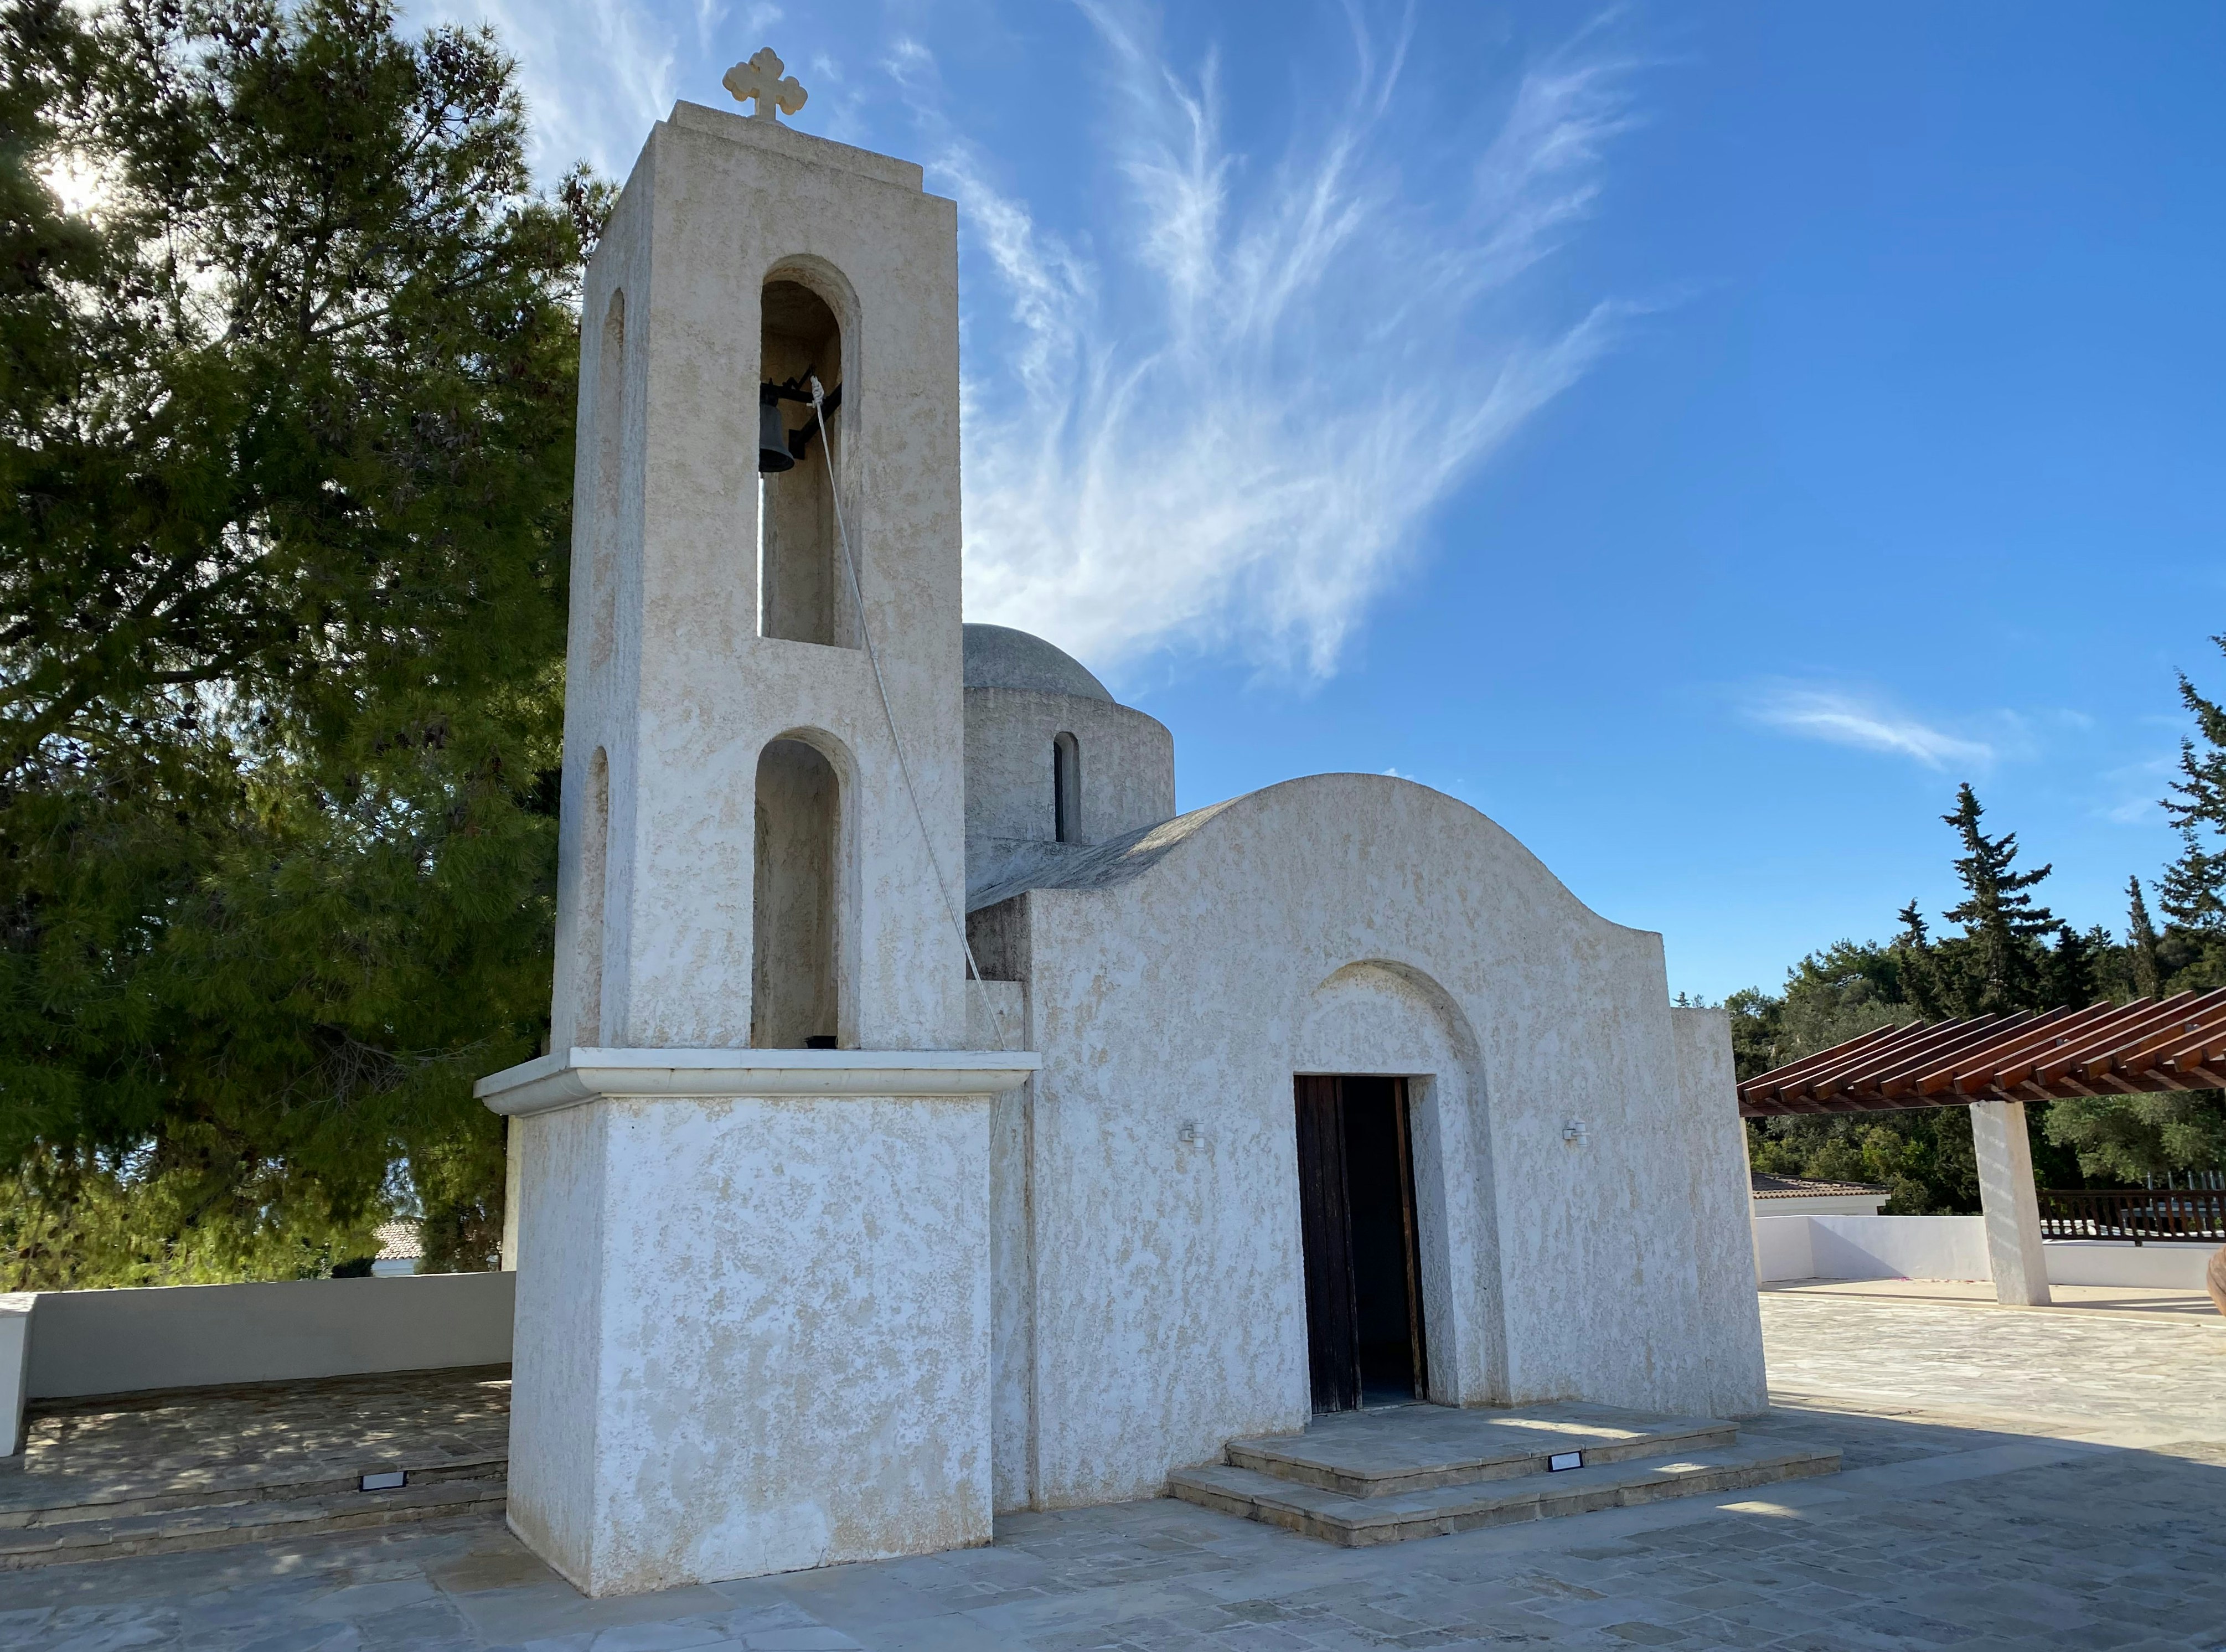 Admiring the great Ayia Athanasia Chapel in Neo Chorio, Cyprus